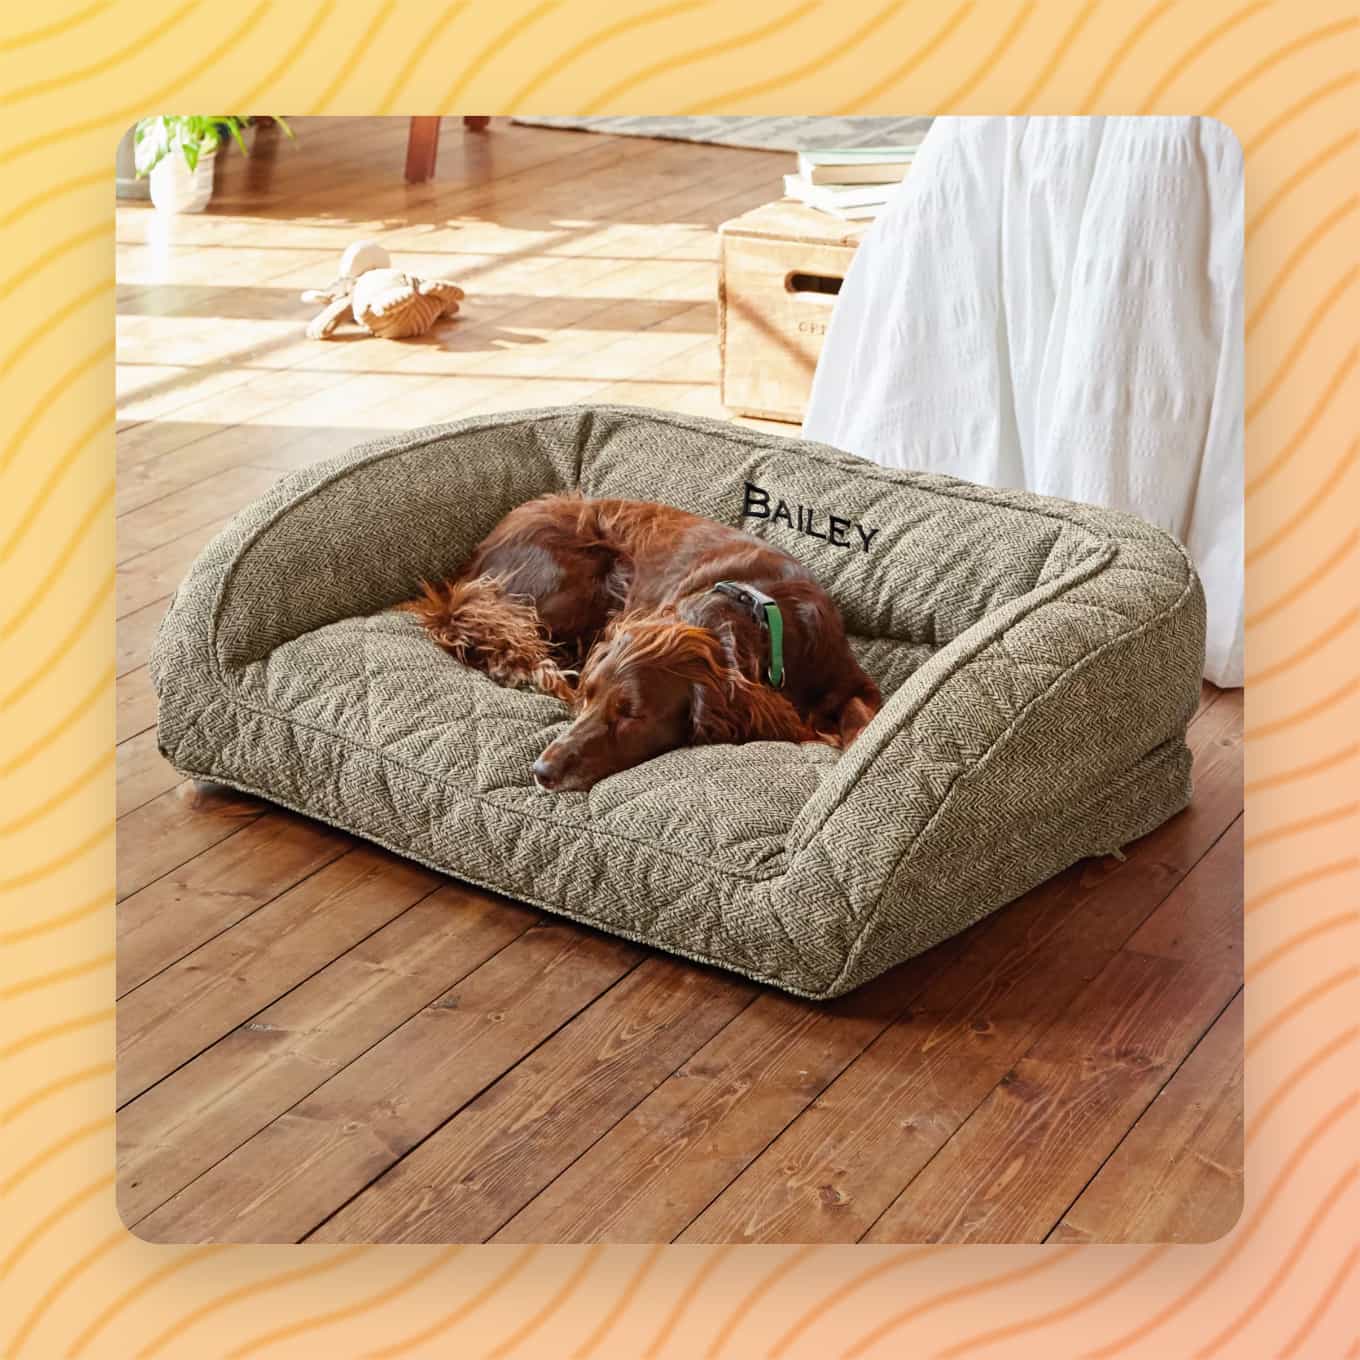 A dog laying on their couch-shaped Orvis dog bed, with their name embroidered on it: Bailey